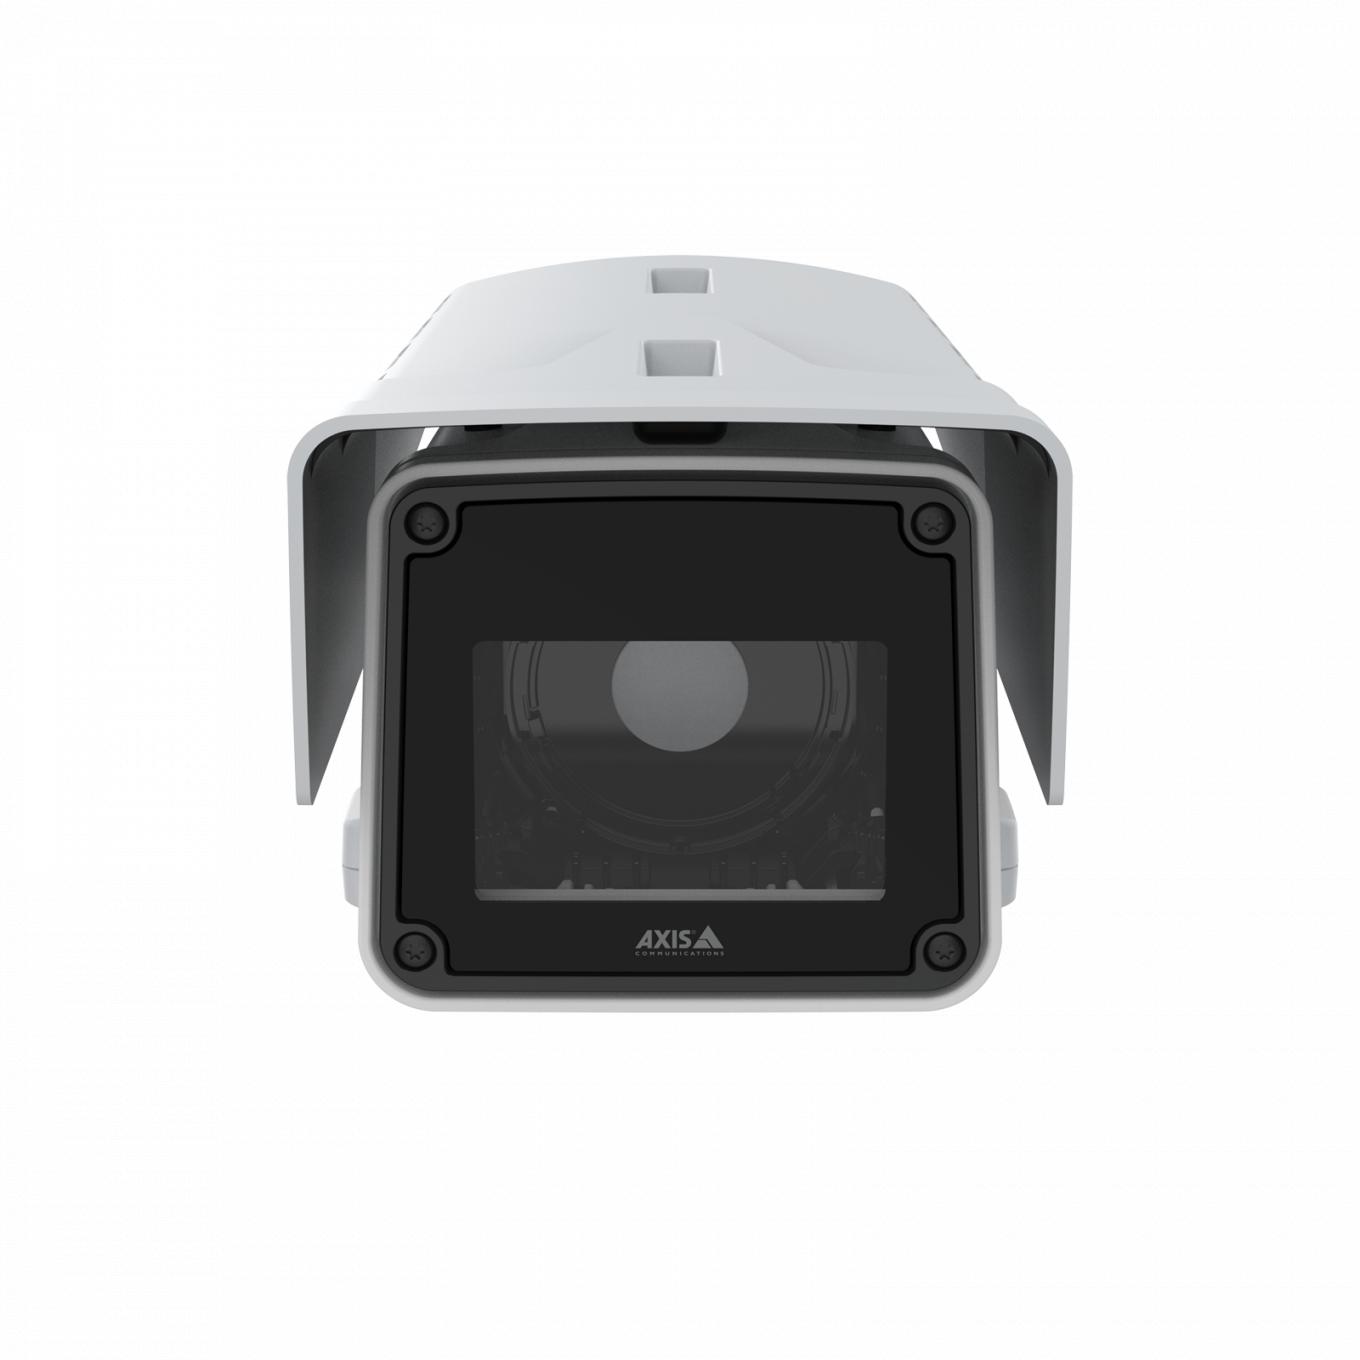 AXIS Q1656-BE Box Camera, viewed from its front